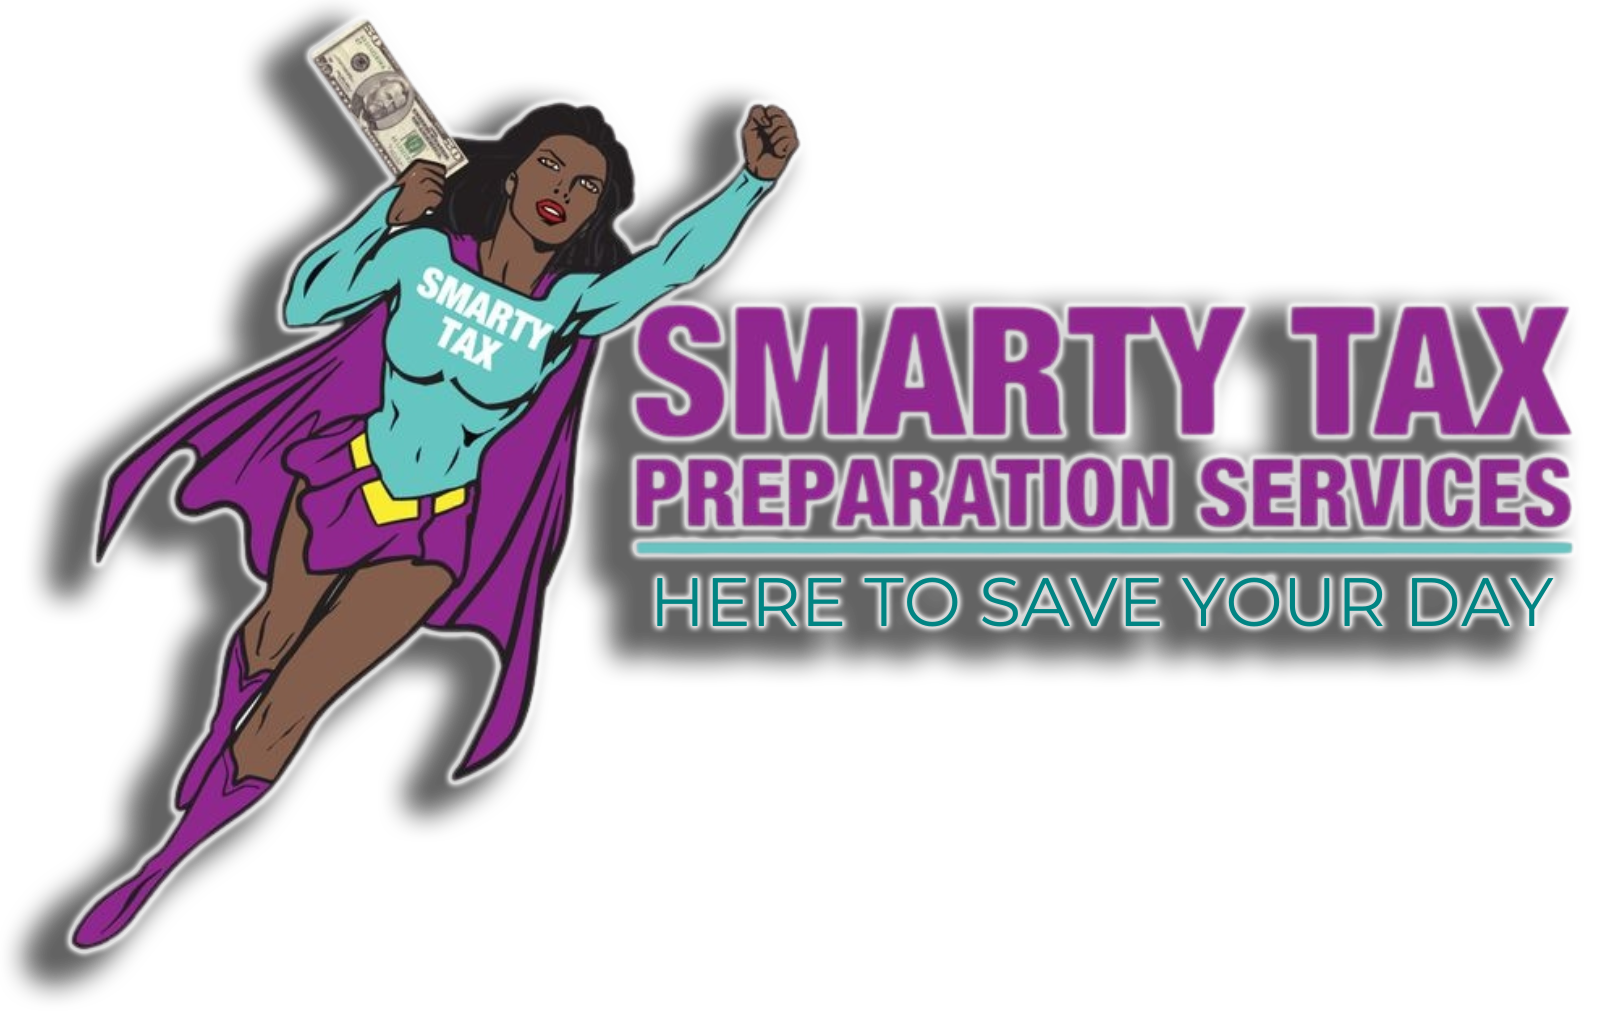 Smarty Tax Preparation Services